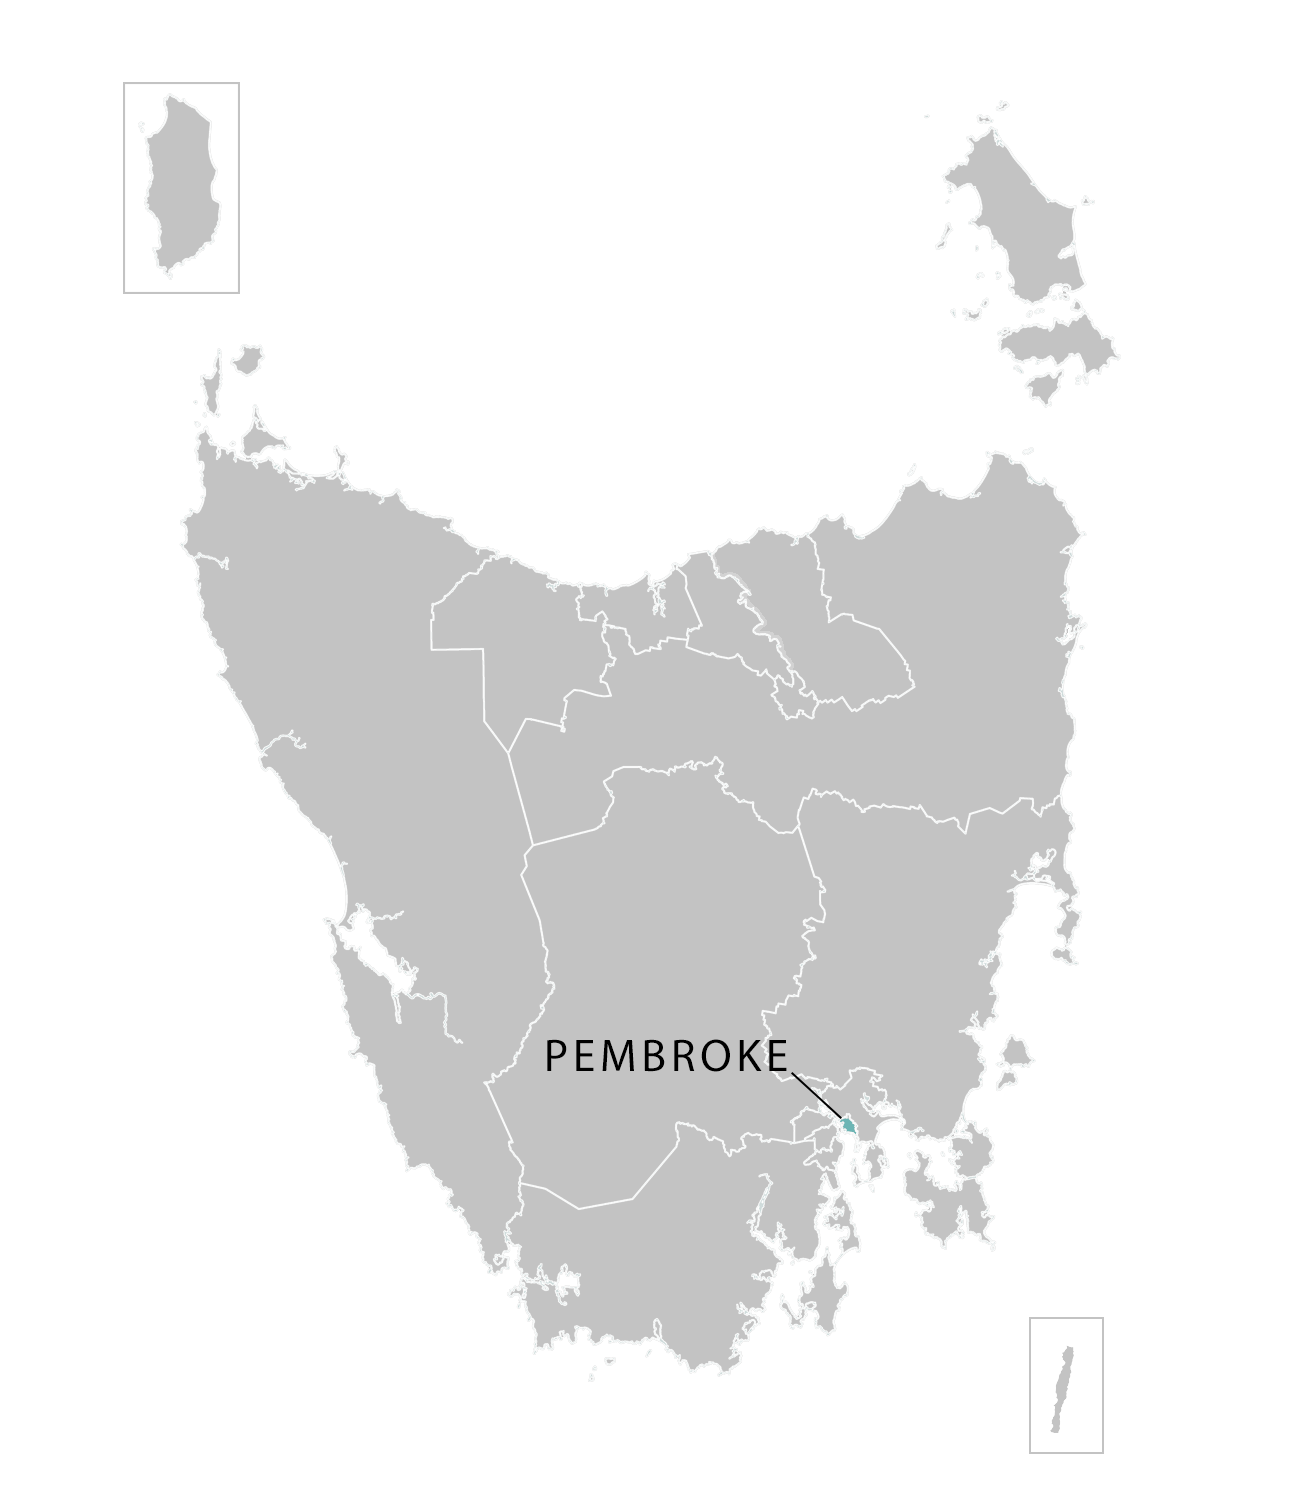 Huon division highlighted on illustrated map of Tasmania